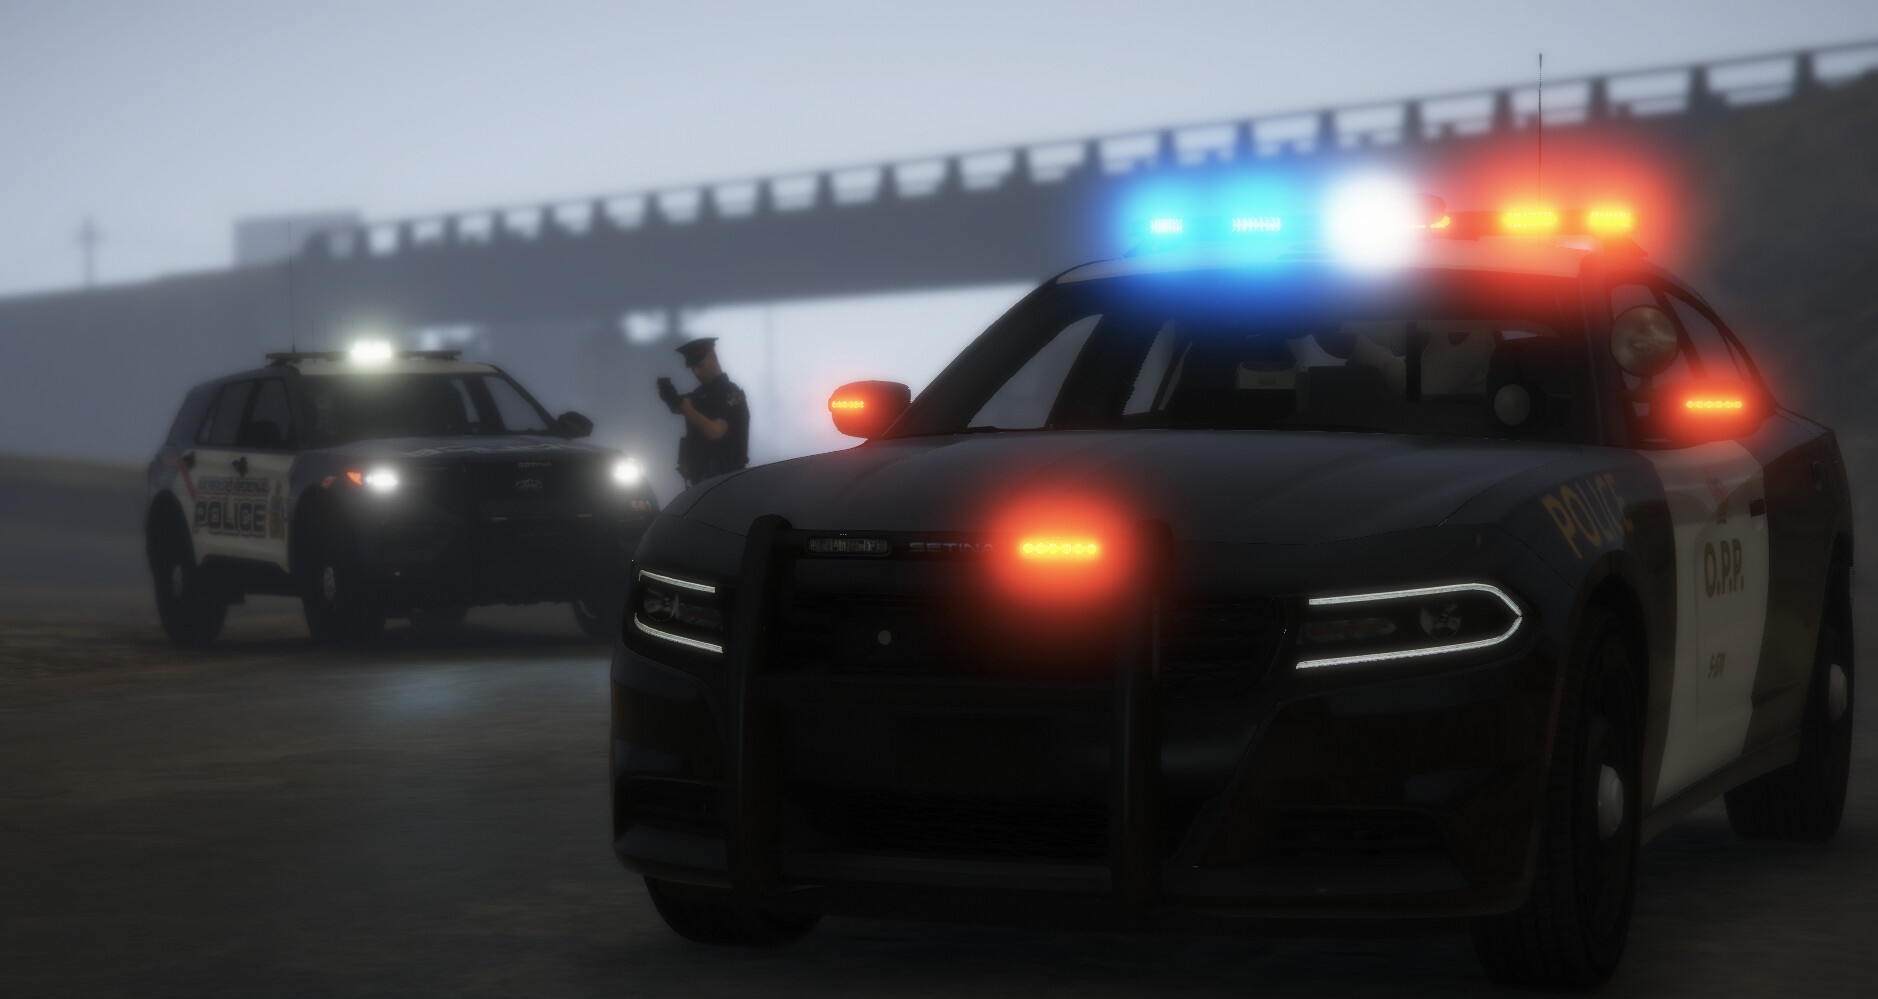 Greater Ontario Roleplay Serious Professional Custom Vehicles Custom Scripts Custom Eup Ontario Provincial Police Fire Ems Civilian Operations Recruiting Server Bazaar Cfx Re Community - emergency services roblox